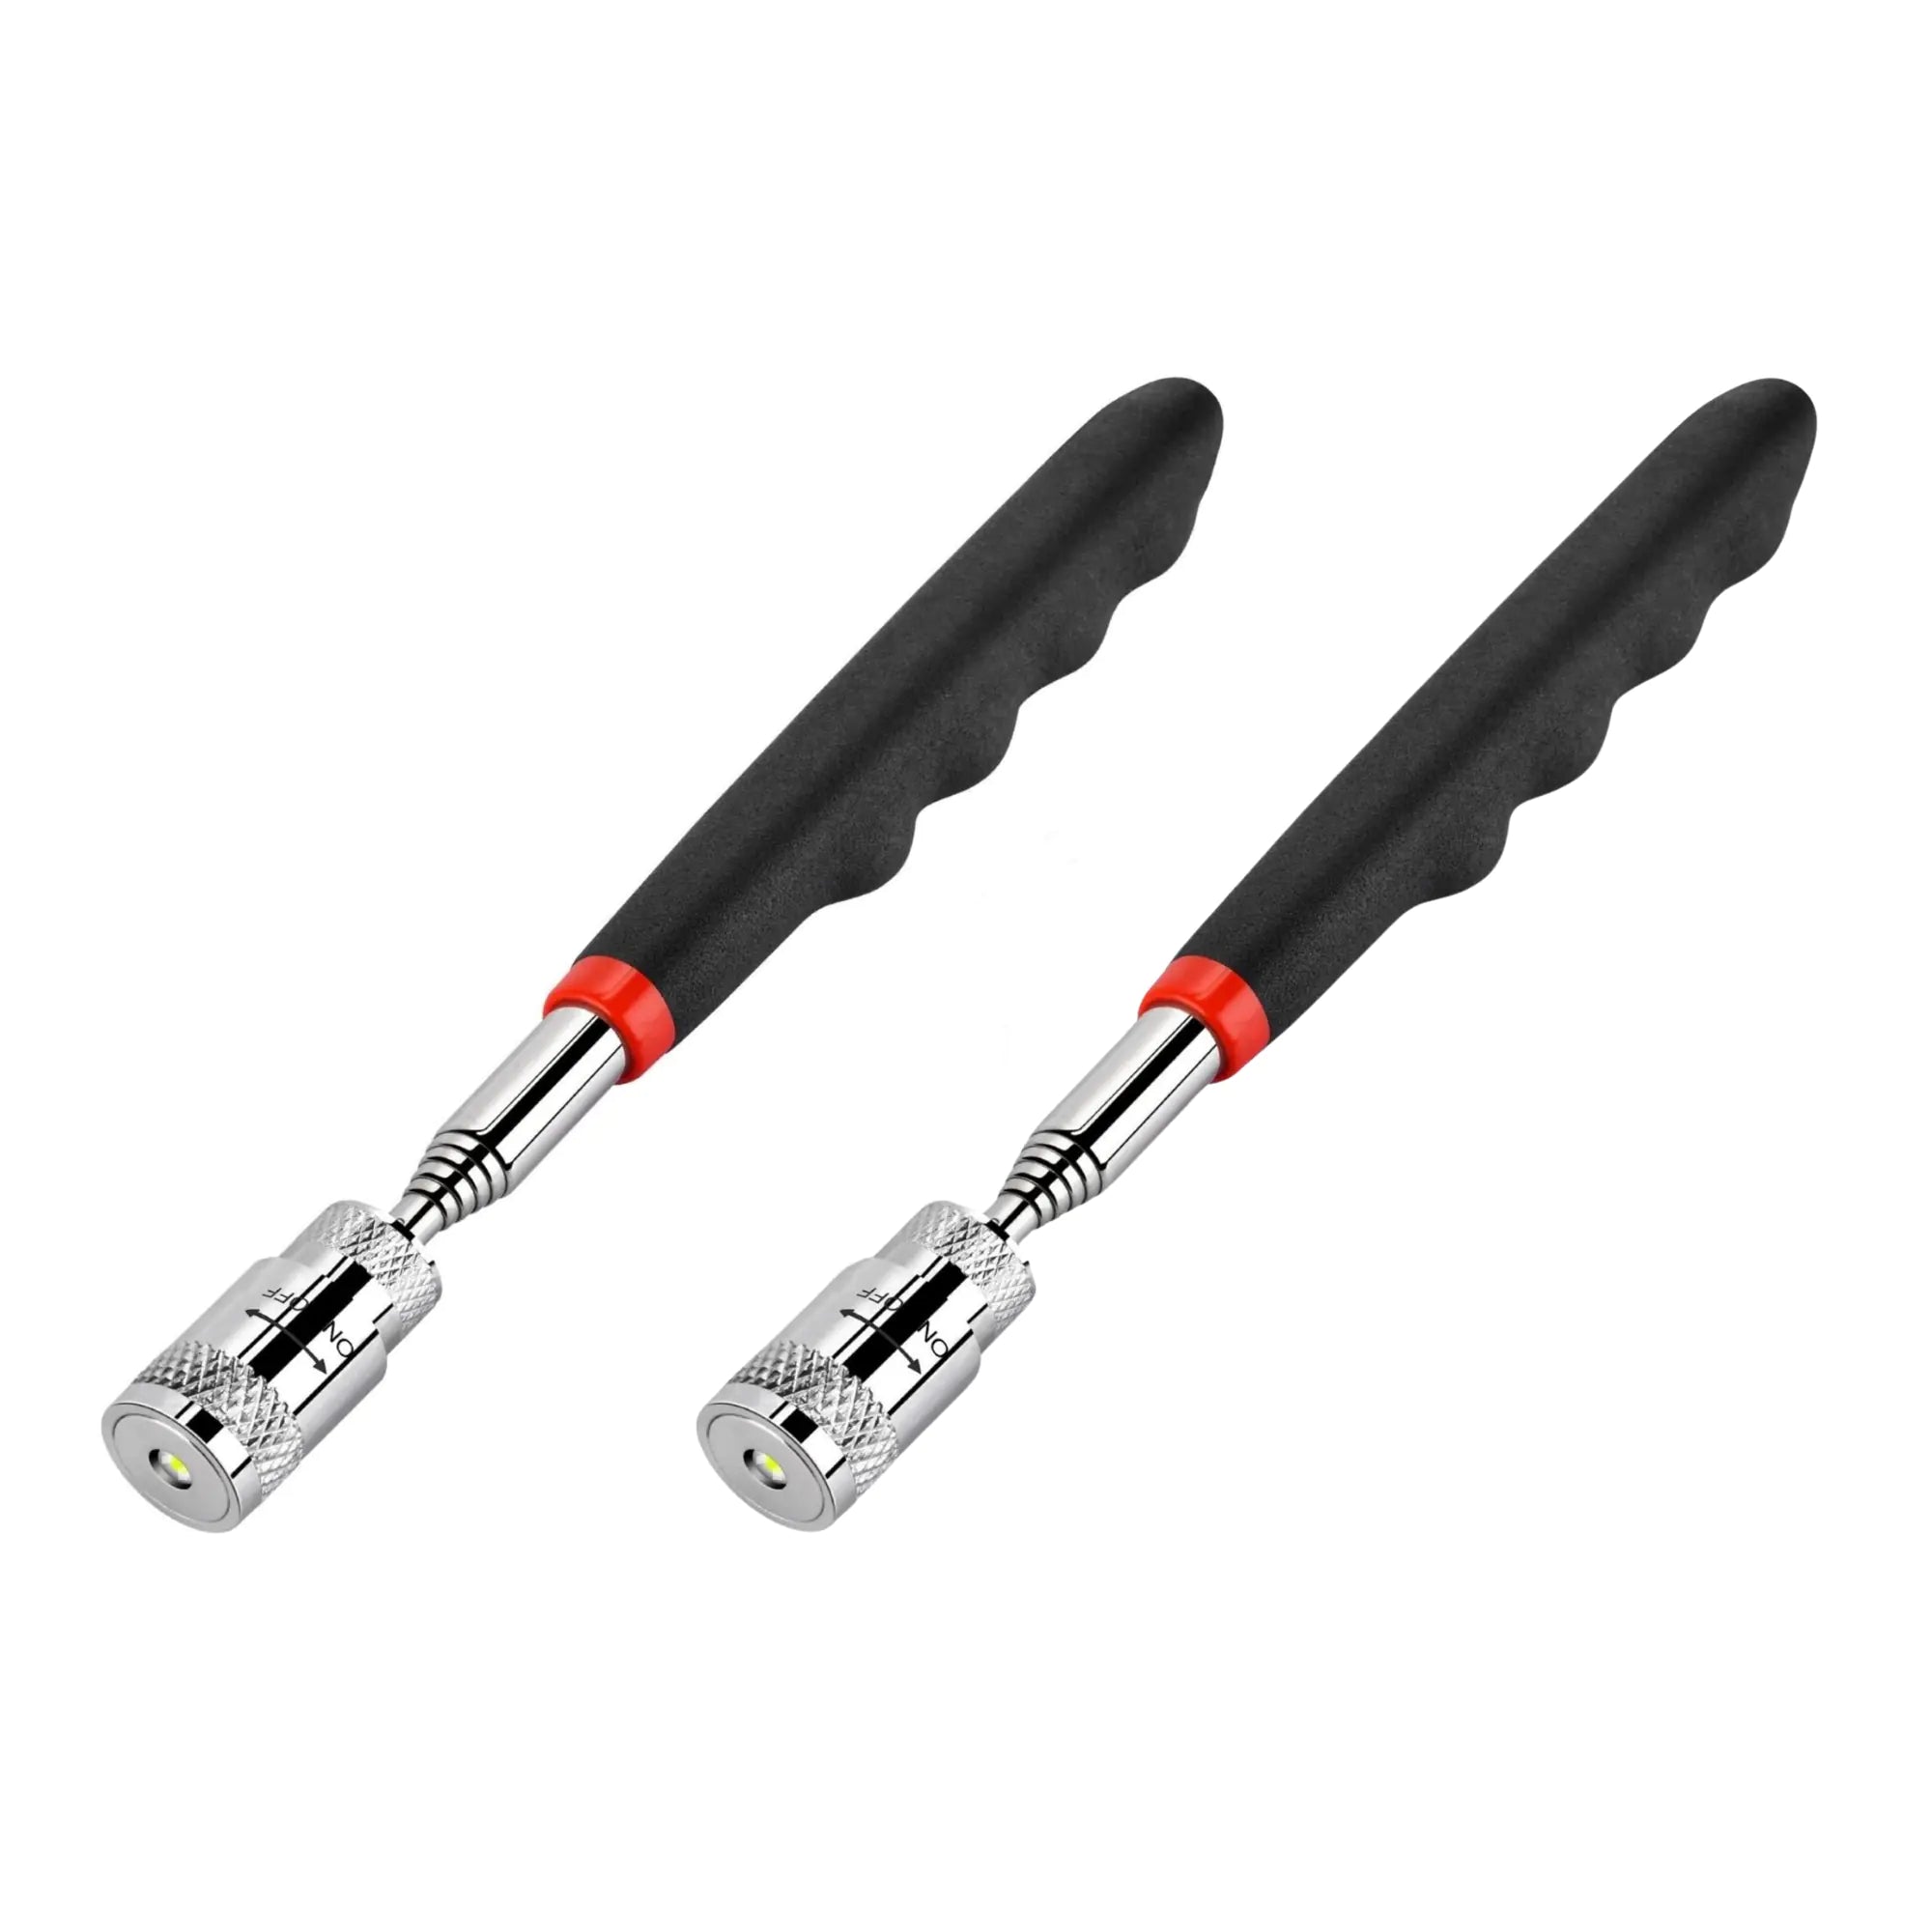 Buy black Magnetic Pick Up Tool with LED Light (2-Pack)